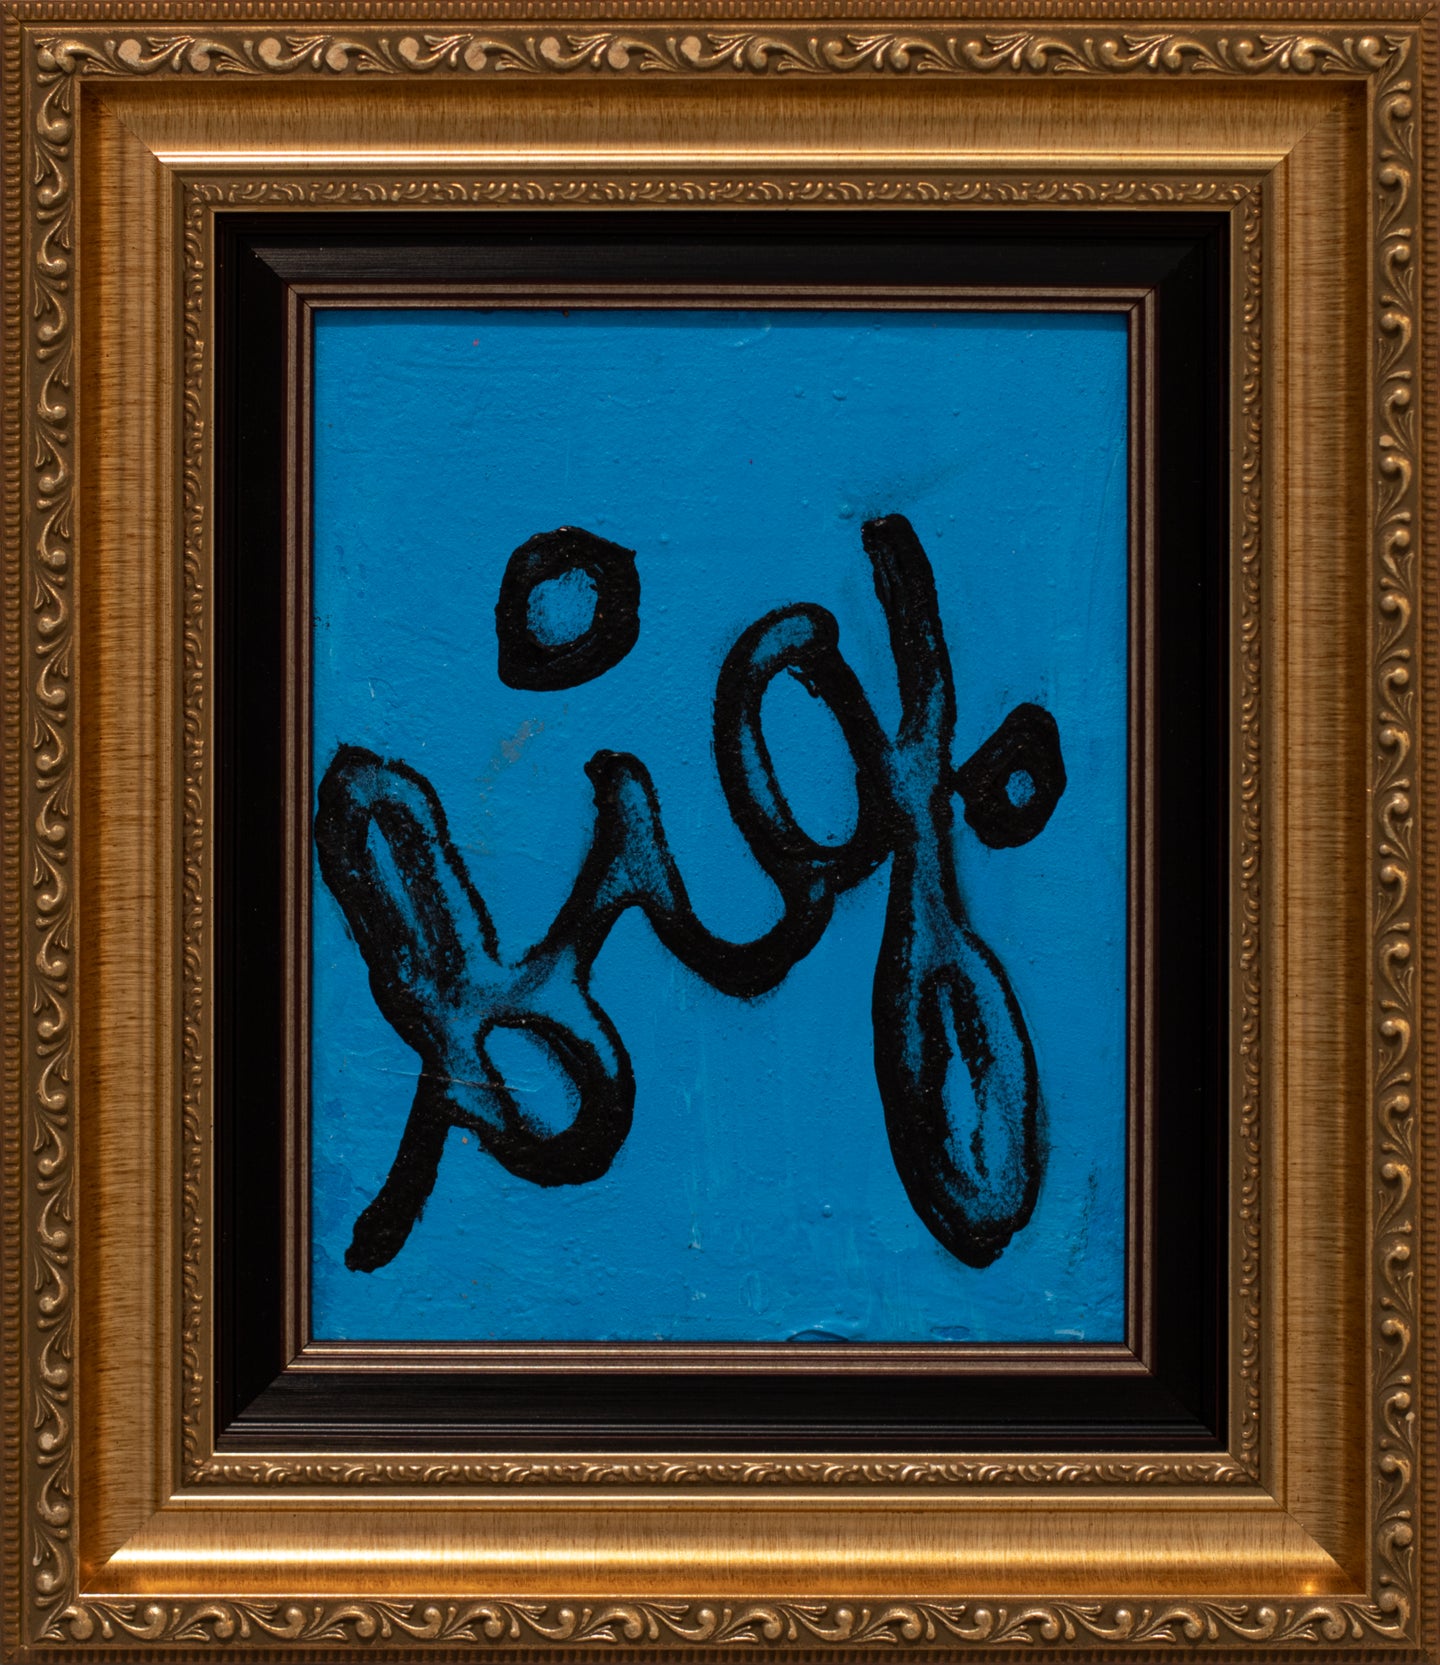 Maite Nobo big.(Blue), 2021 Mixed-media on wood 10 x 8 inches  Framed Dimensions: 15h x 13w x 2d inches Framed by artist.